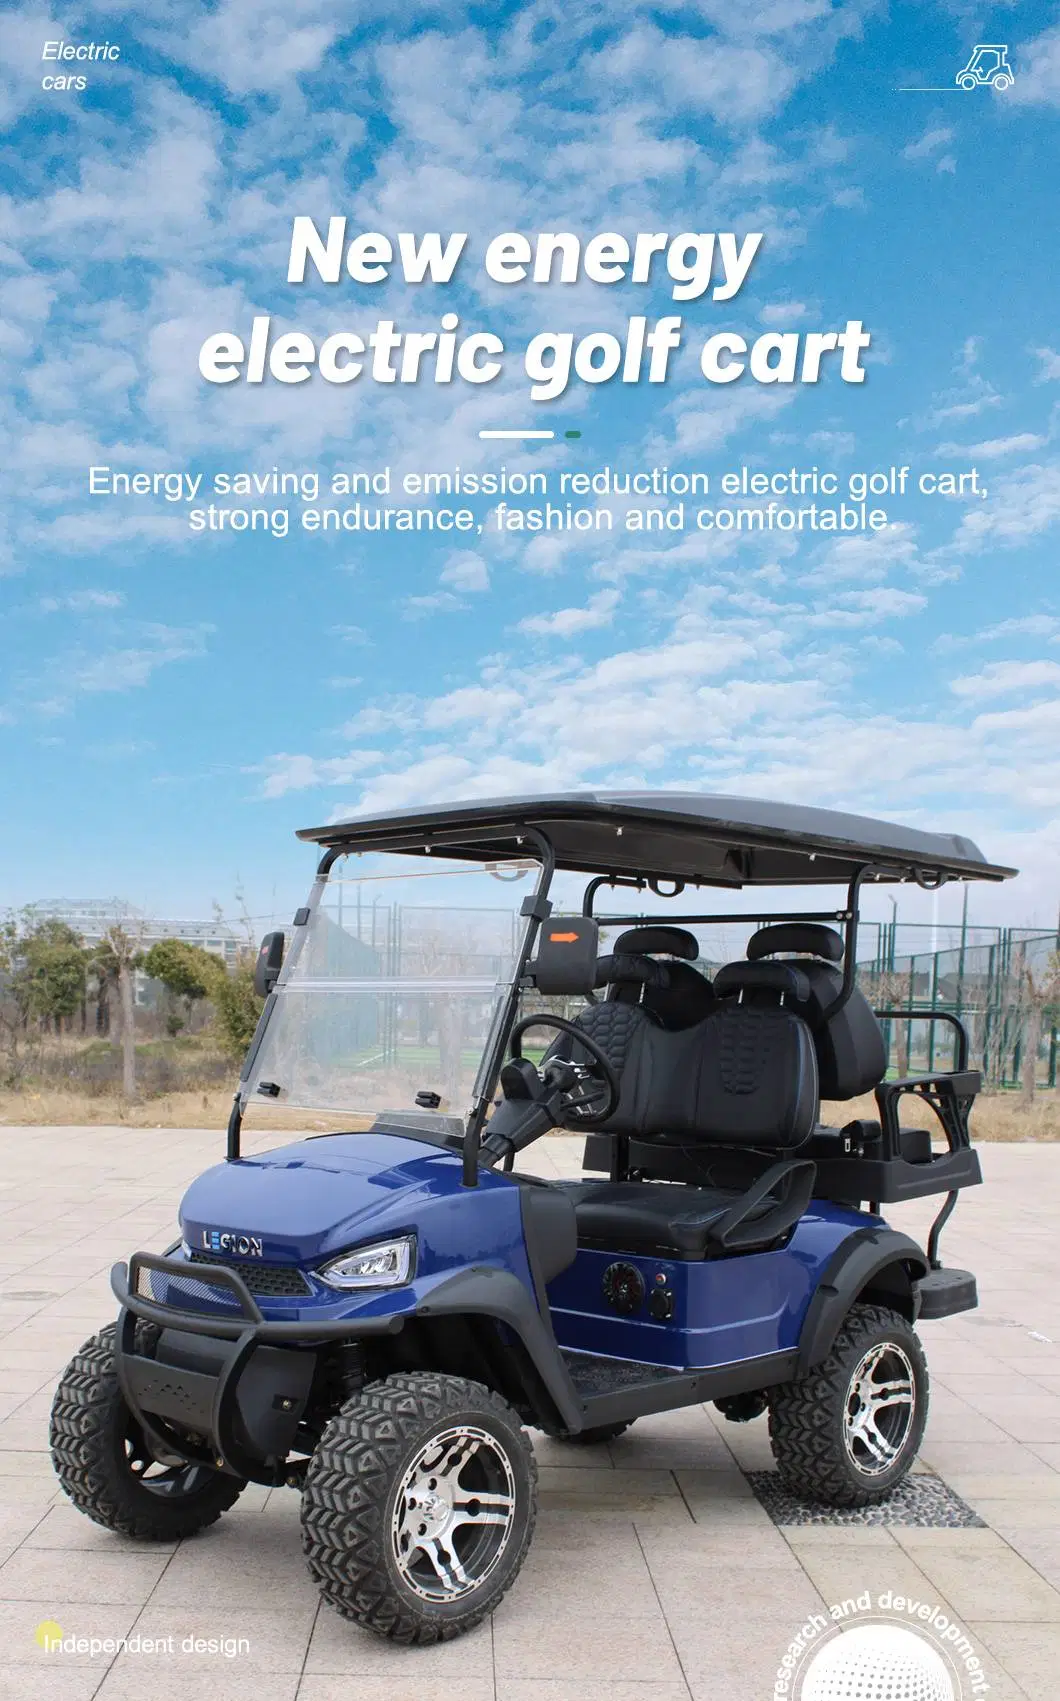 Factory Outlet 4 6 Person Seat Lithium Battery Folding Electric Golf Carts with CE Certificate Custom Electric Golf Carts